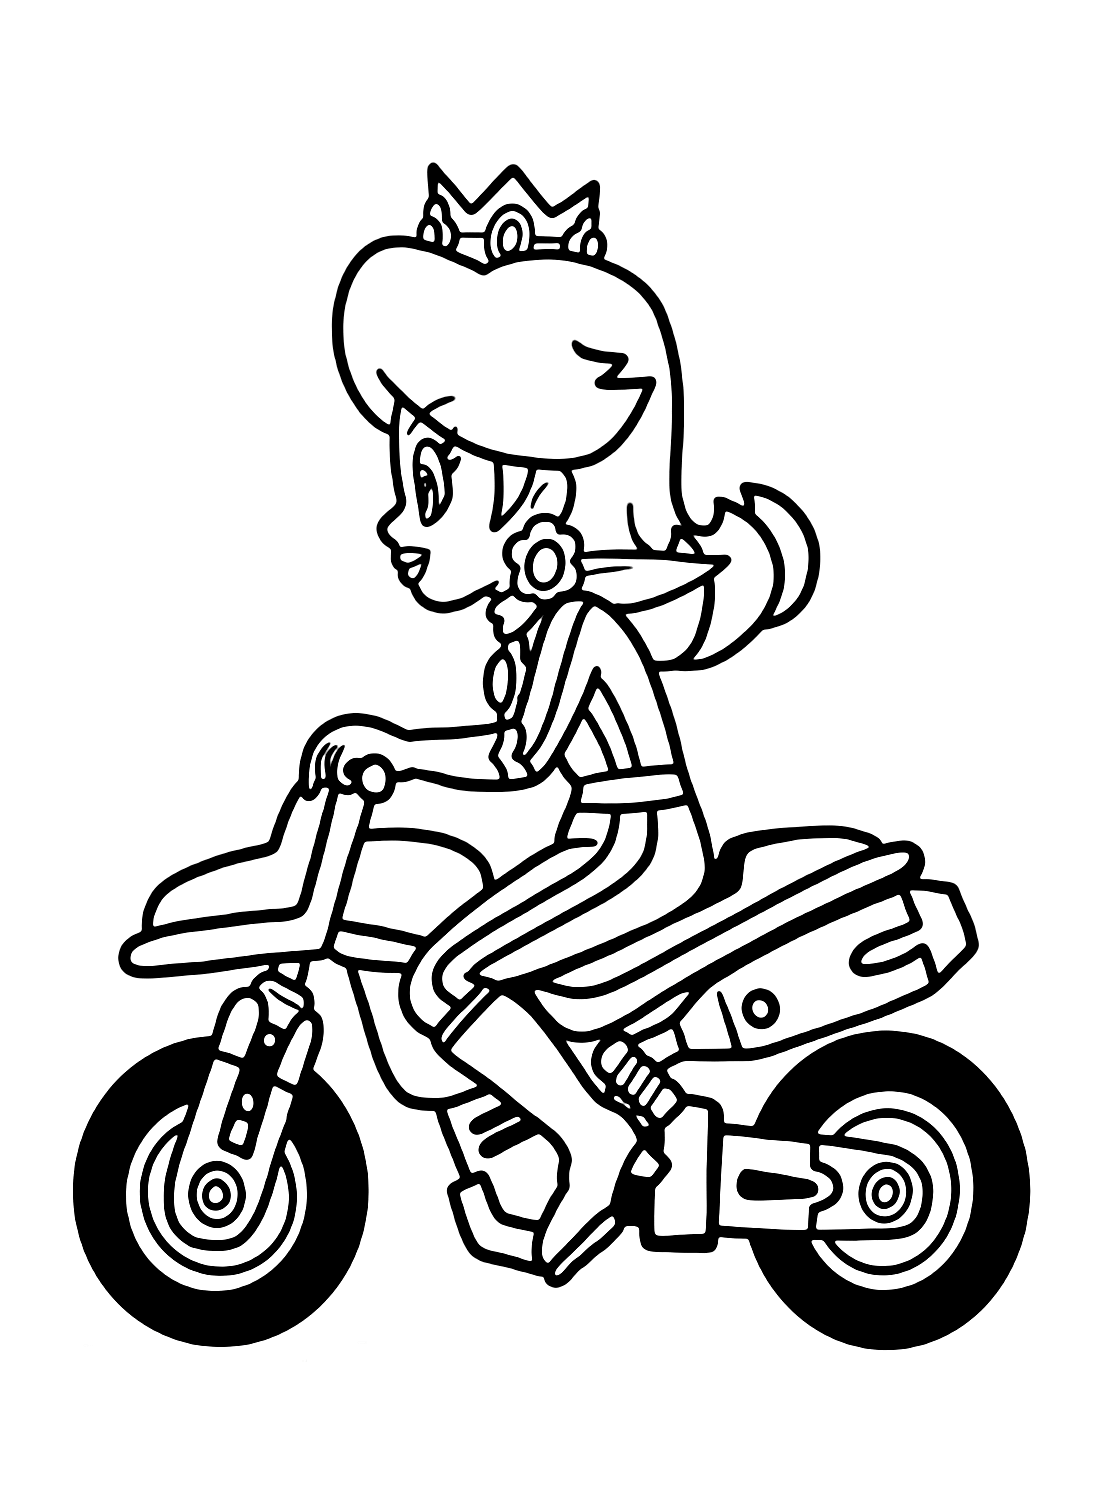 Mario Kart Coloring Pages Printable For Free Download 